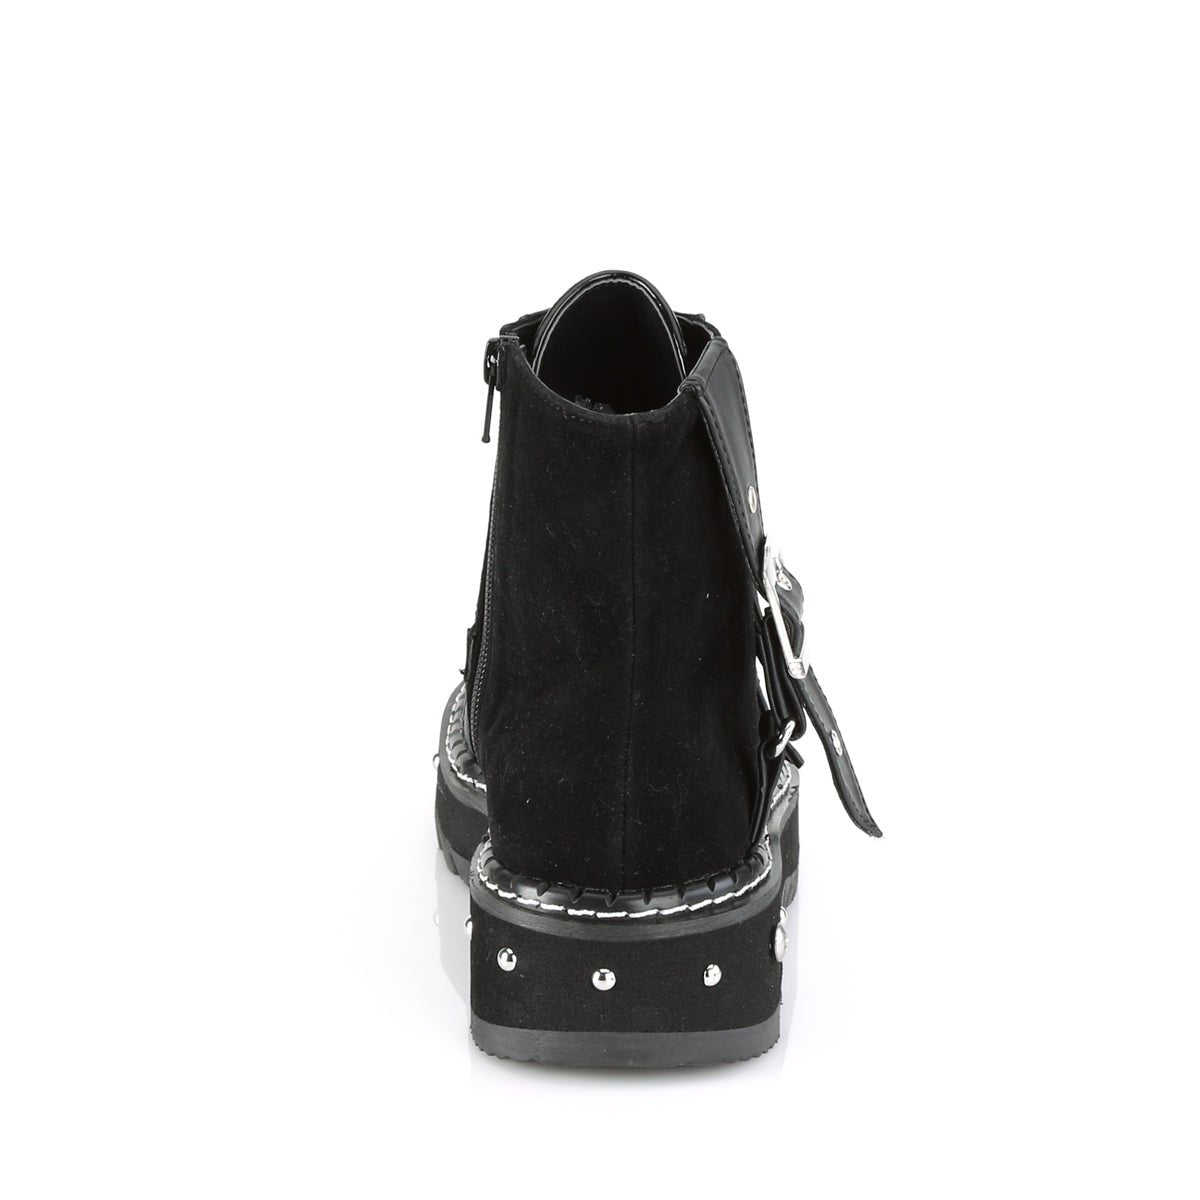 Too Fast | Demonia Lilith 278 | Black Vegan Leather &amp; Vegan Suede Women&#39;s Ankle Boots